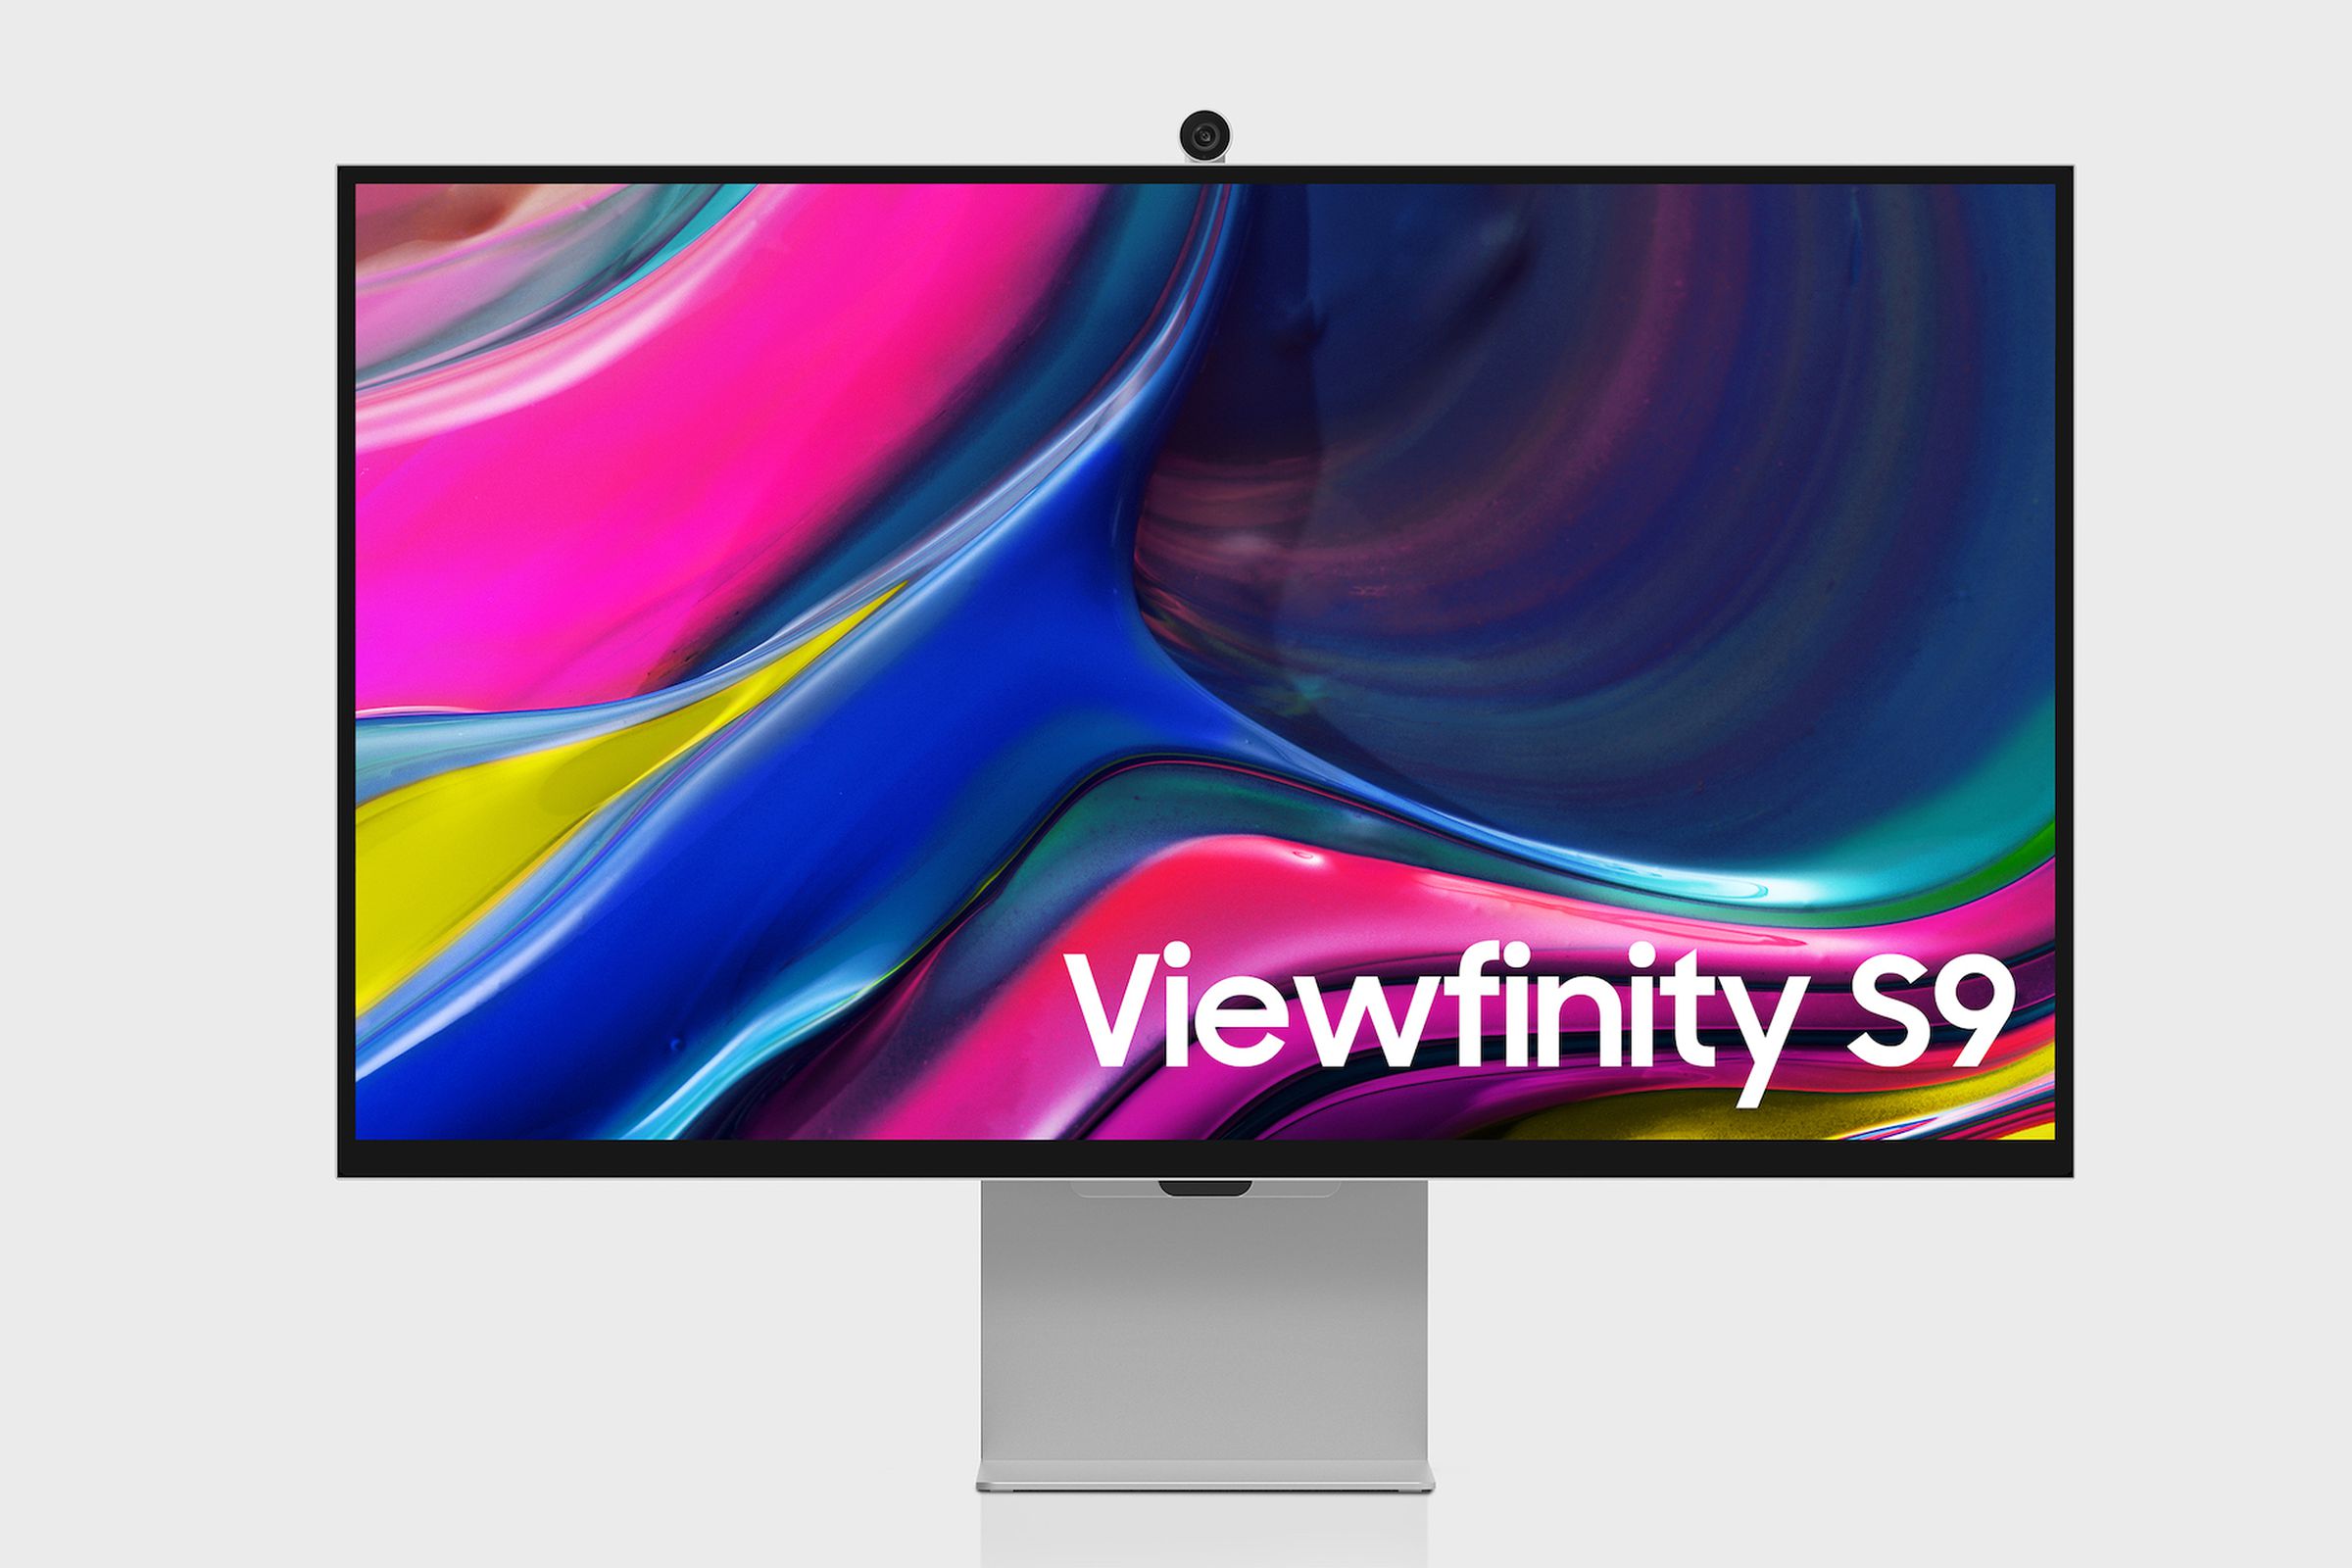 A marketing image of Samsung’s ViewFinity S9 monitor.